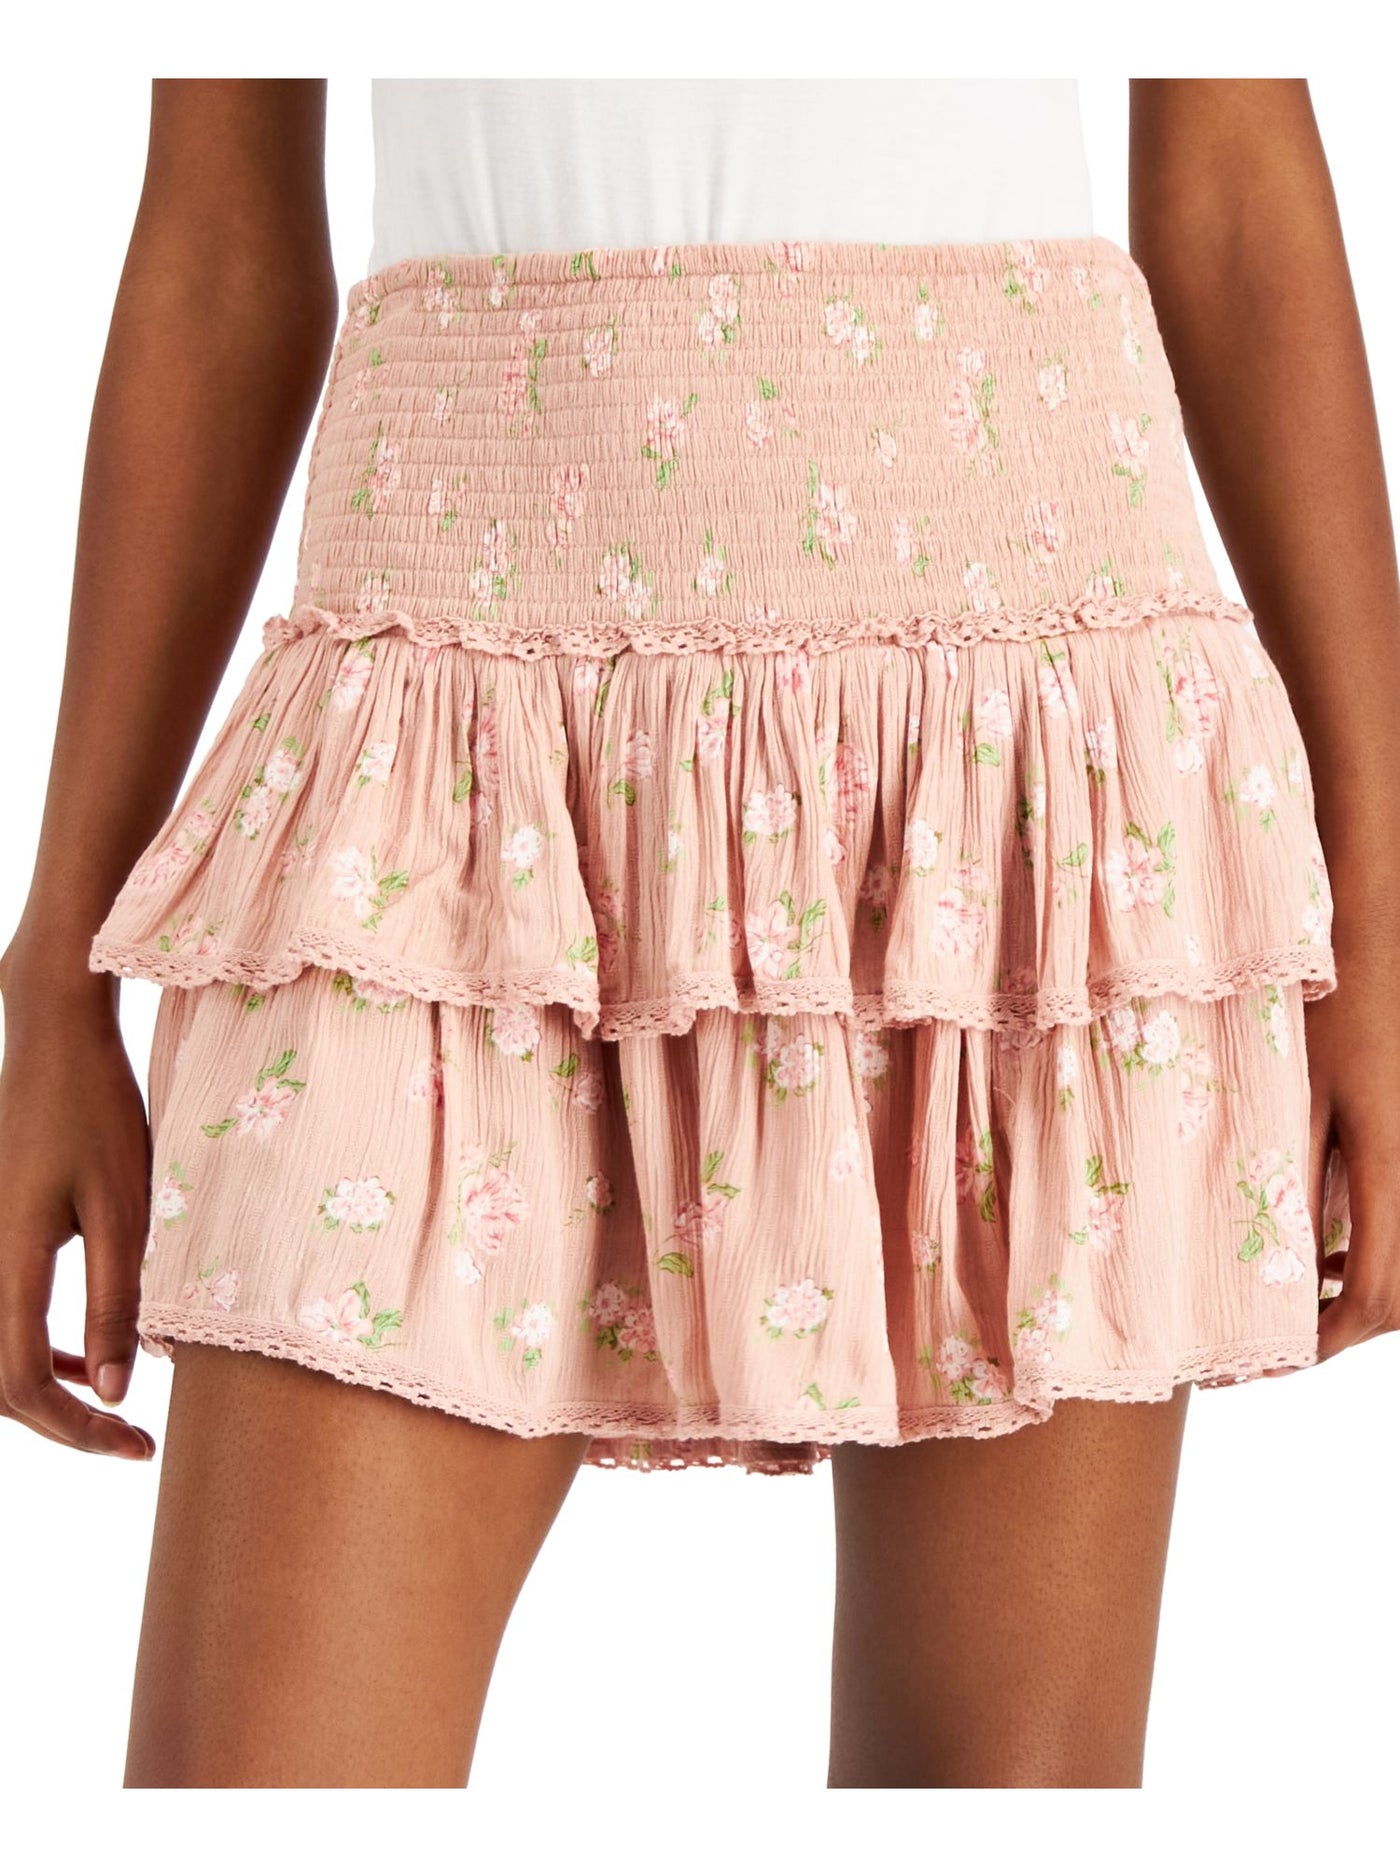 LUCKY BRAND Womens Pink Smocked Pull-on Tiered Lined Floral Mini A-Line Skirt XL